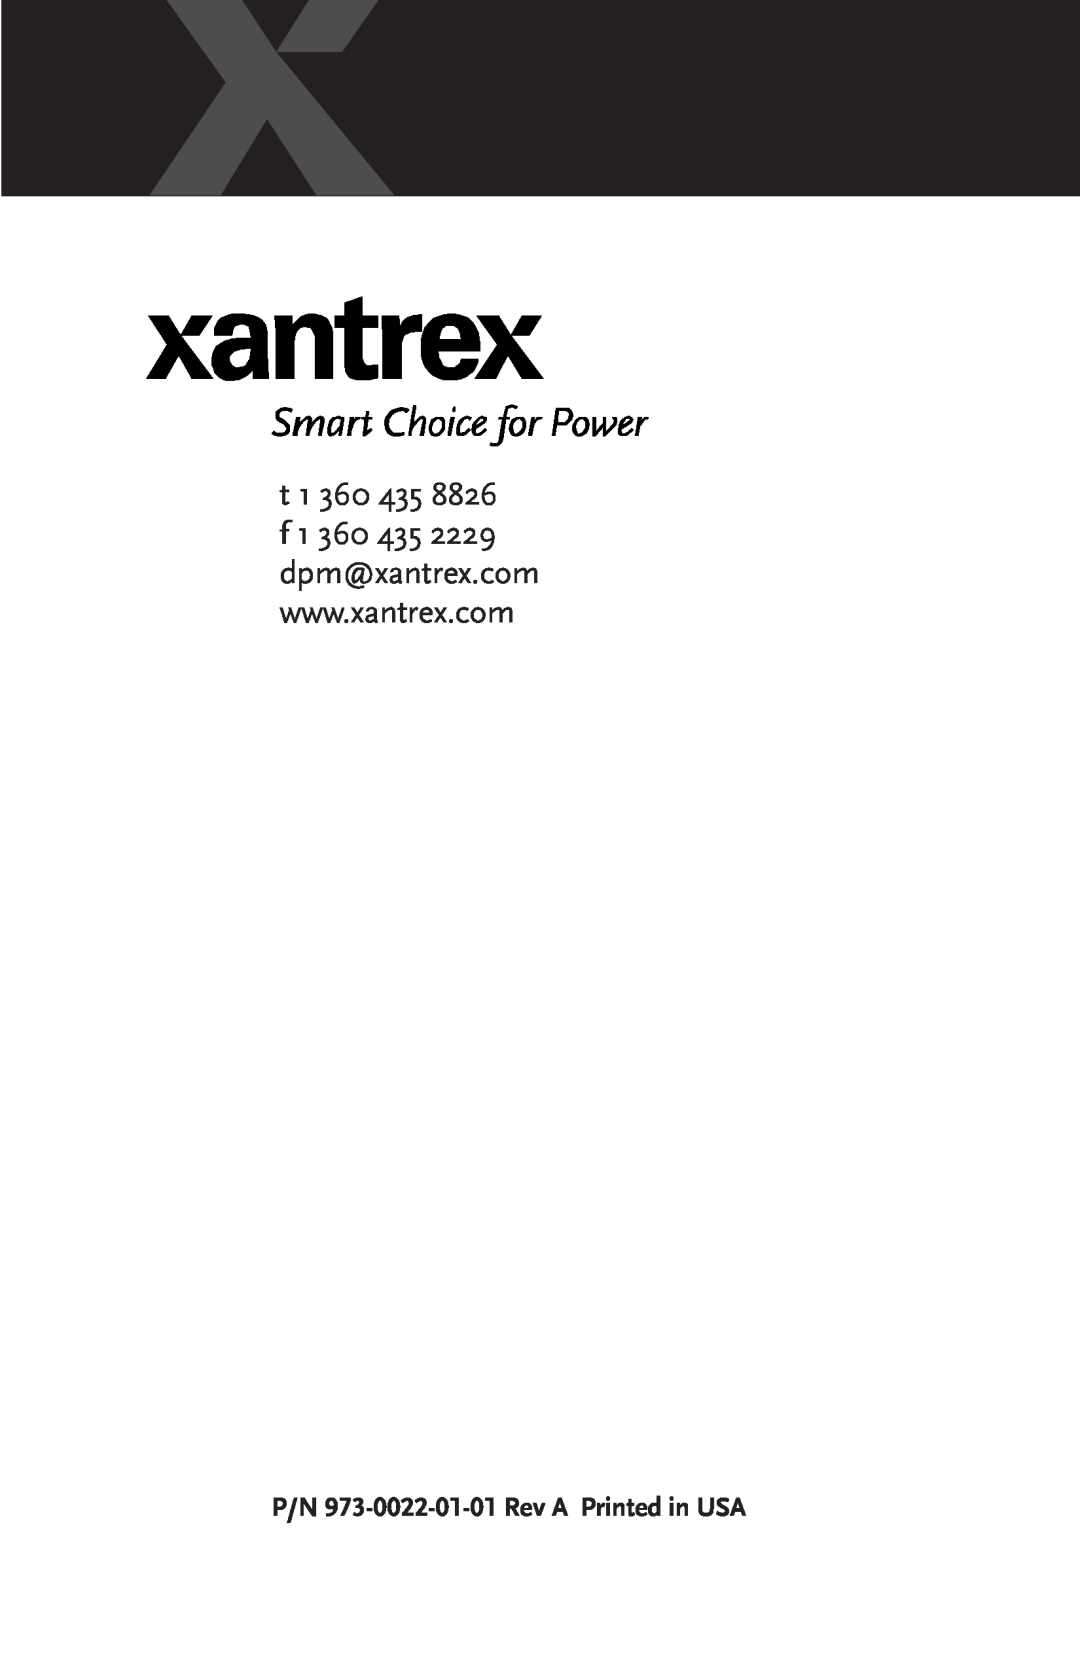 Xantrex Technology SW Communications Adapter owner manual 1 360 435 